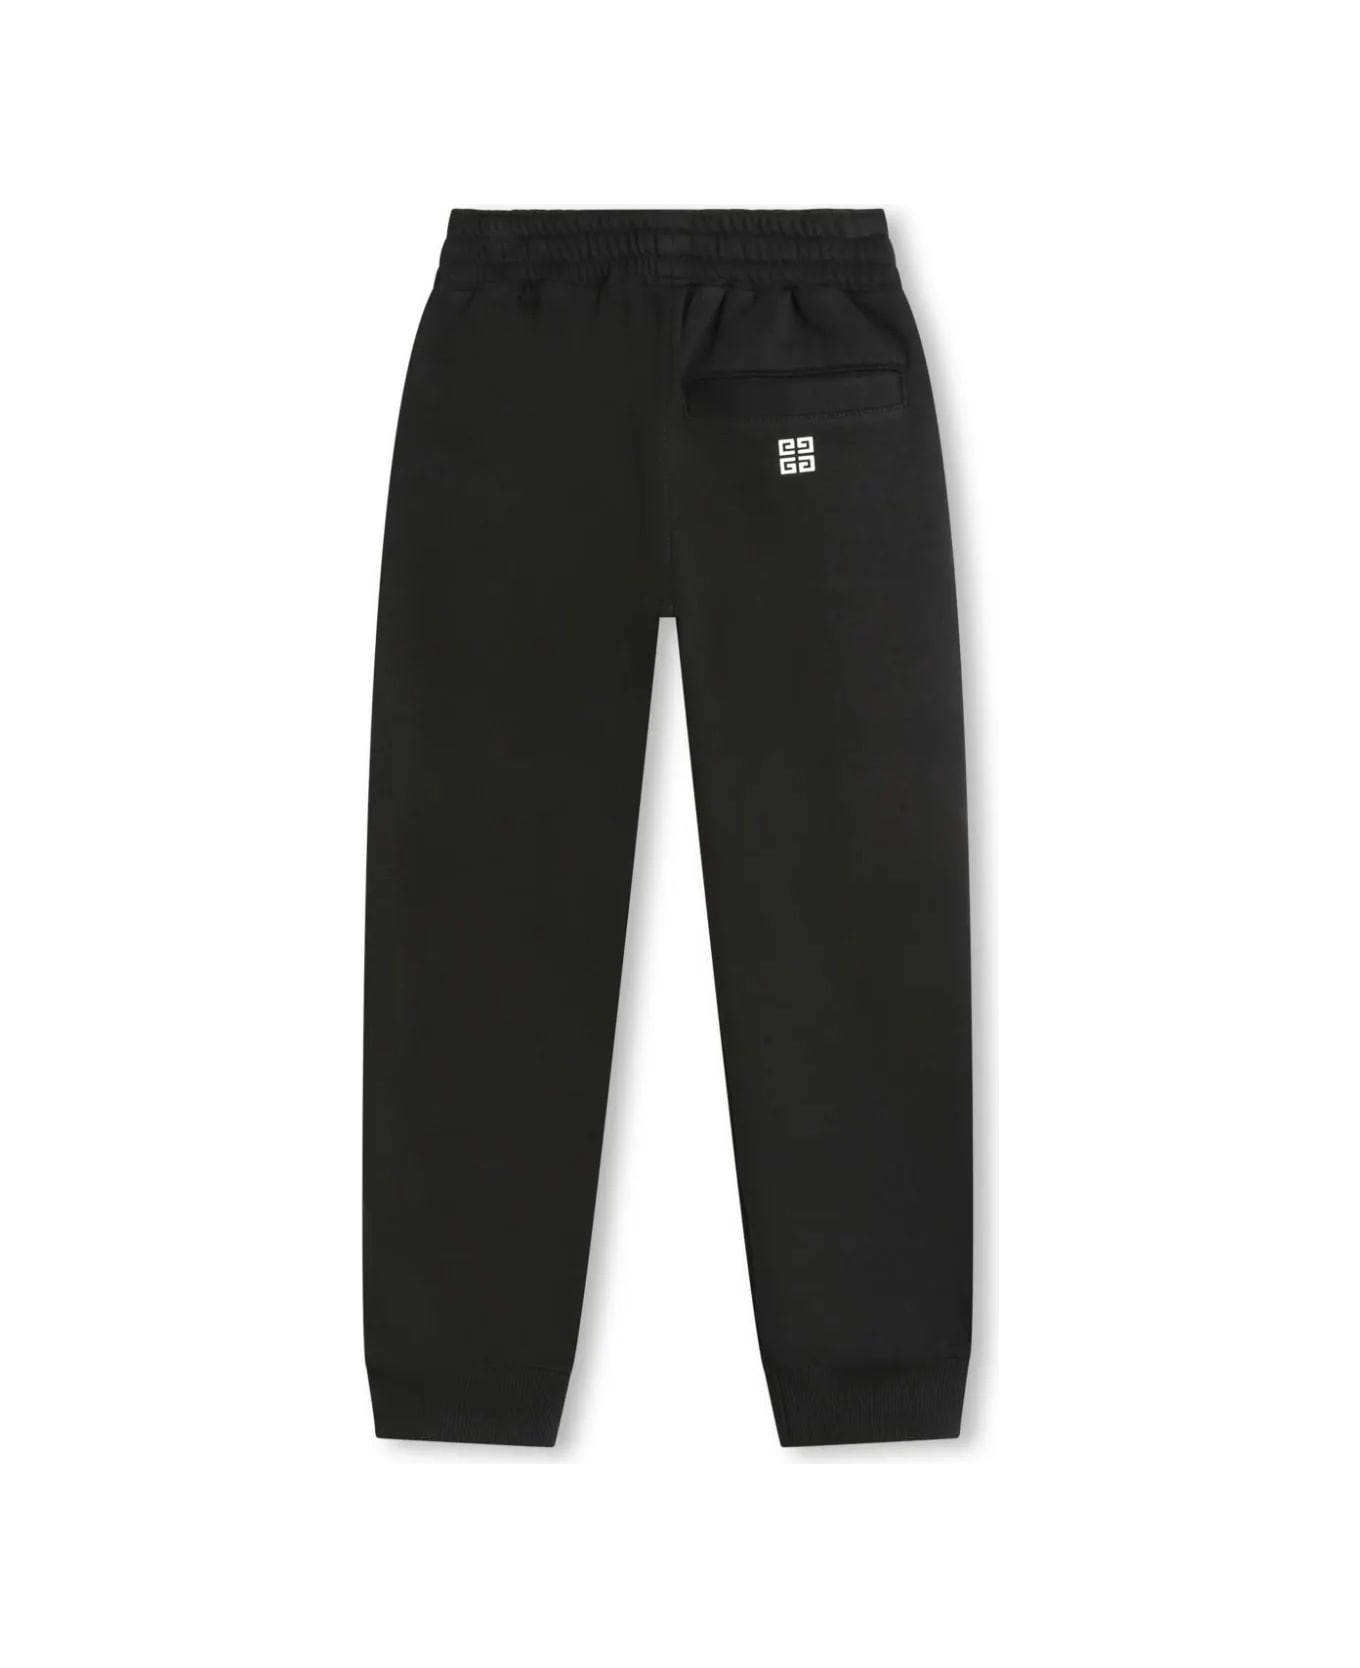 Givenchy Black Joggers With Arched Logo - Black ボトムス